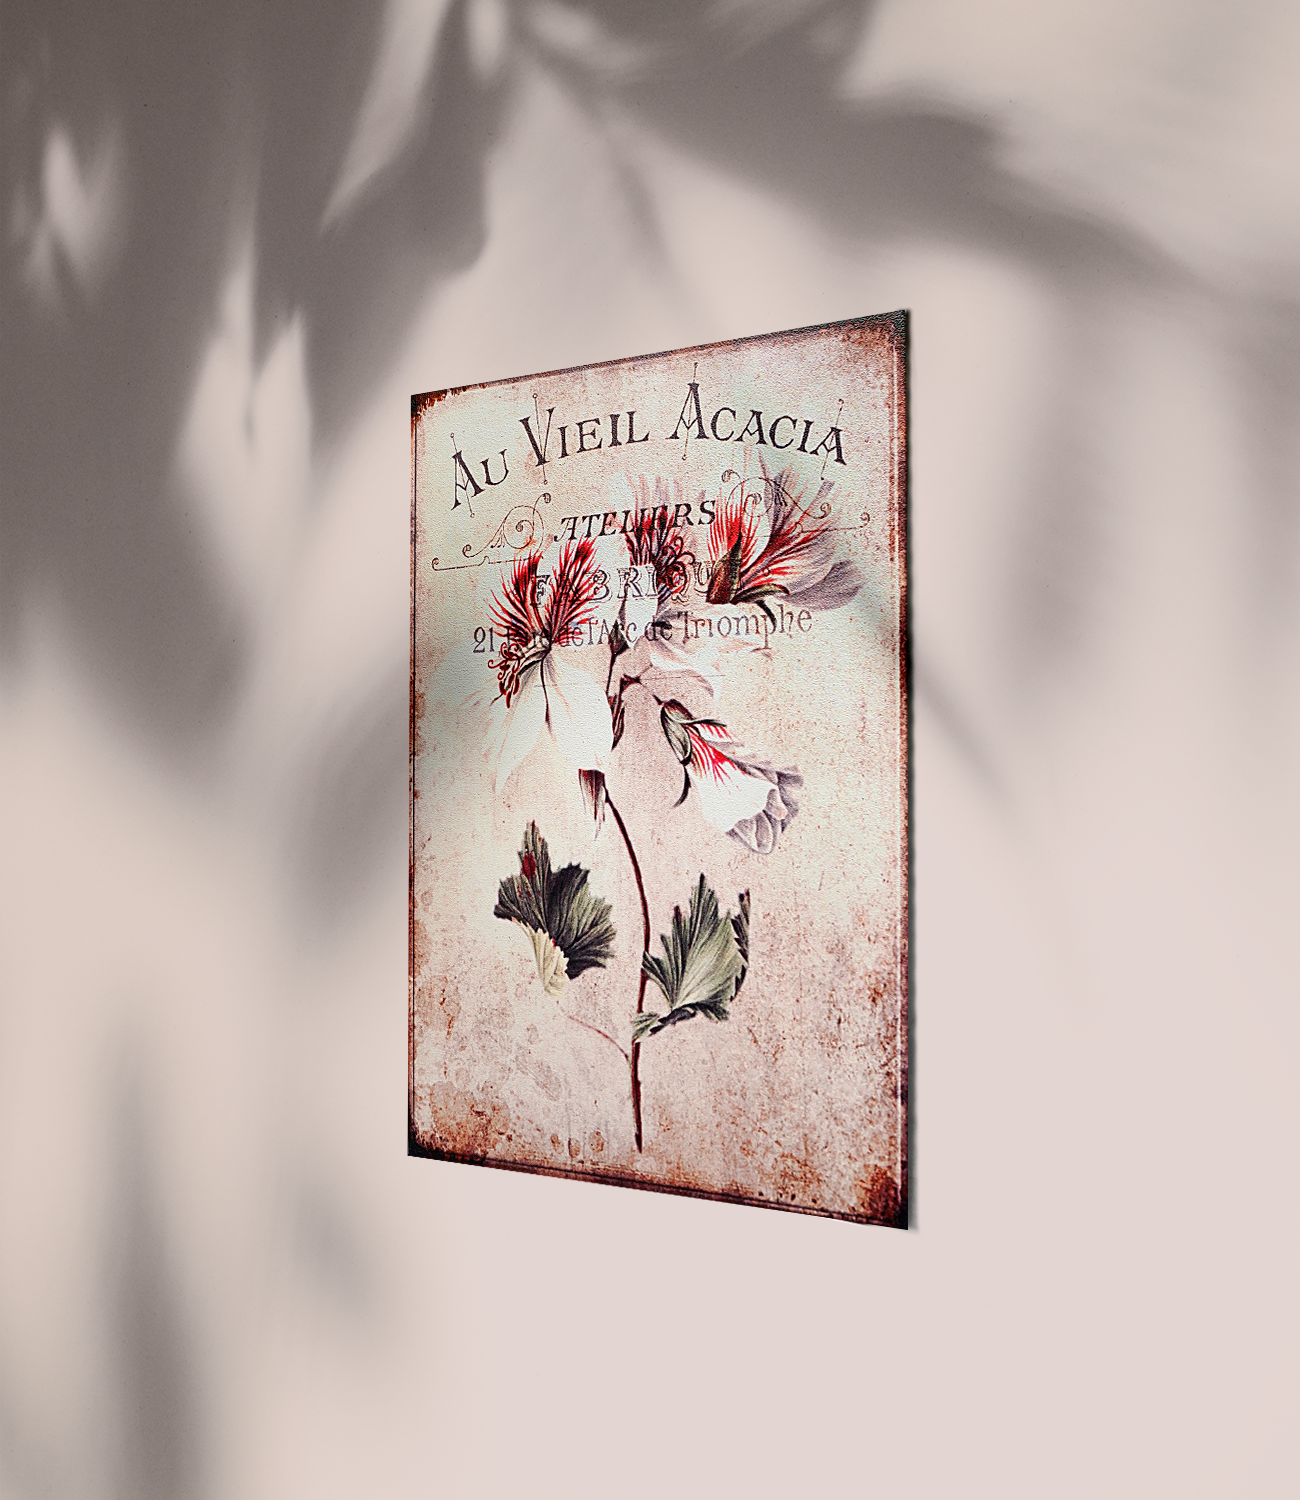 Au Vieil Acacia Rustic Wall Art For Living Room, Bedroom, Kitchen, Café, and Restaurant